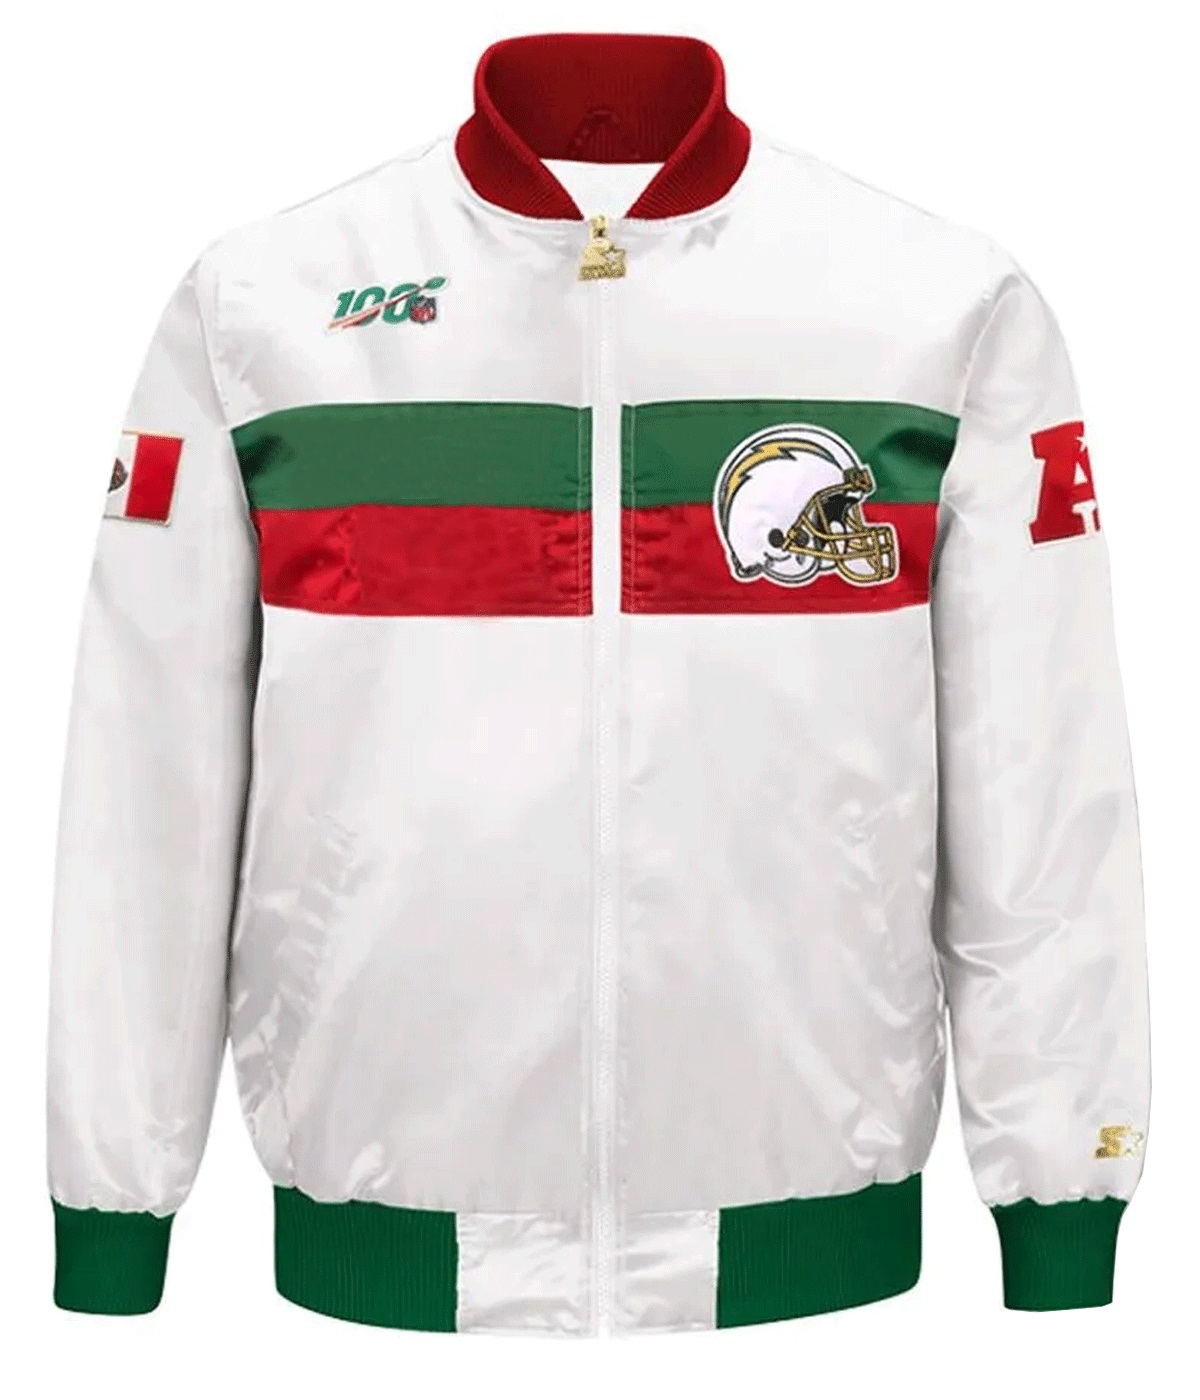 Los Angeles Chargers Mexico 2019 White Satin Jacket